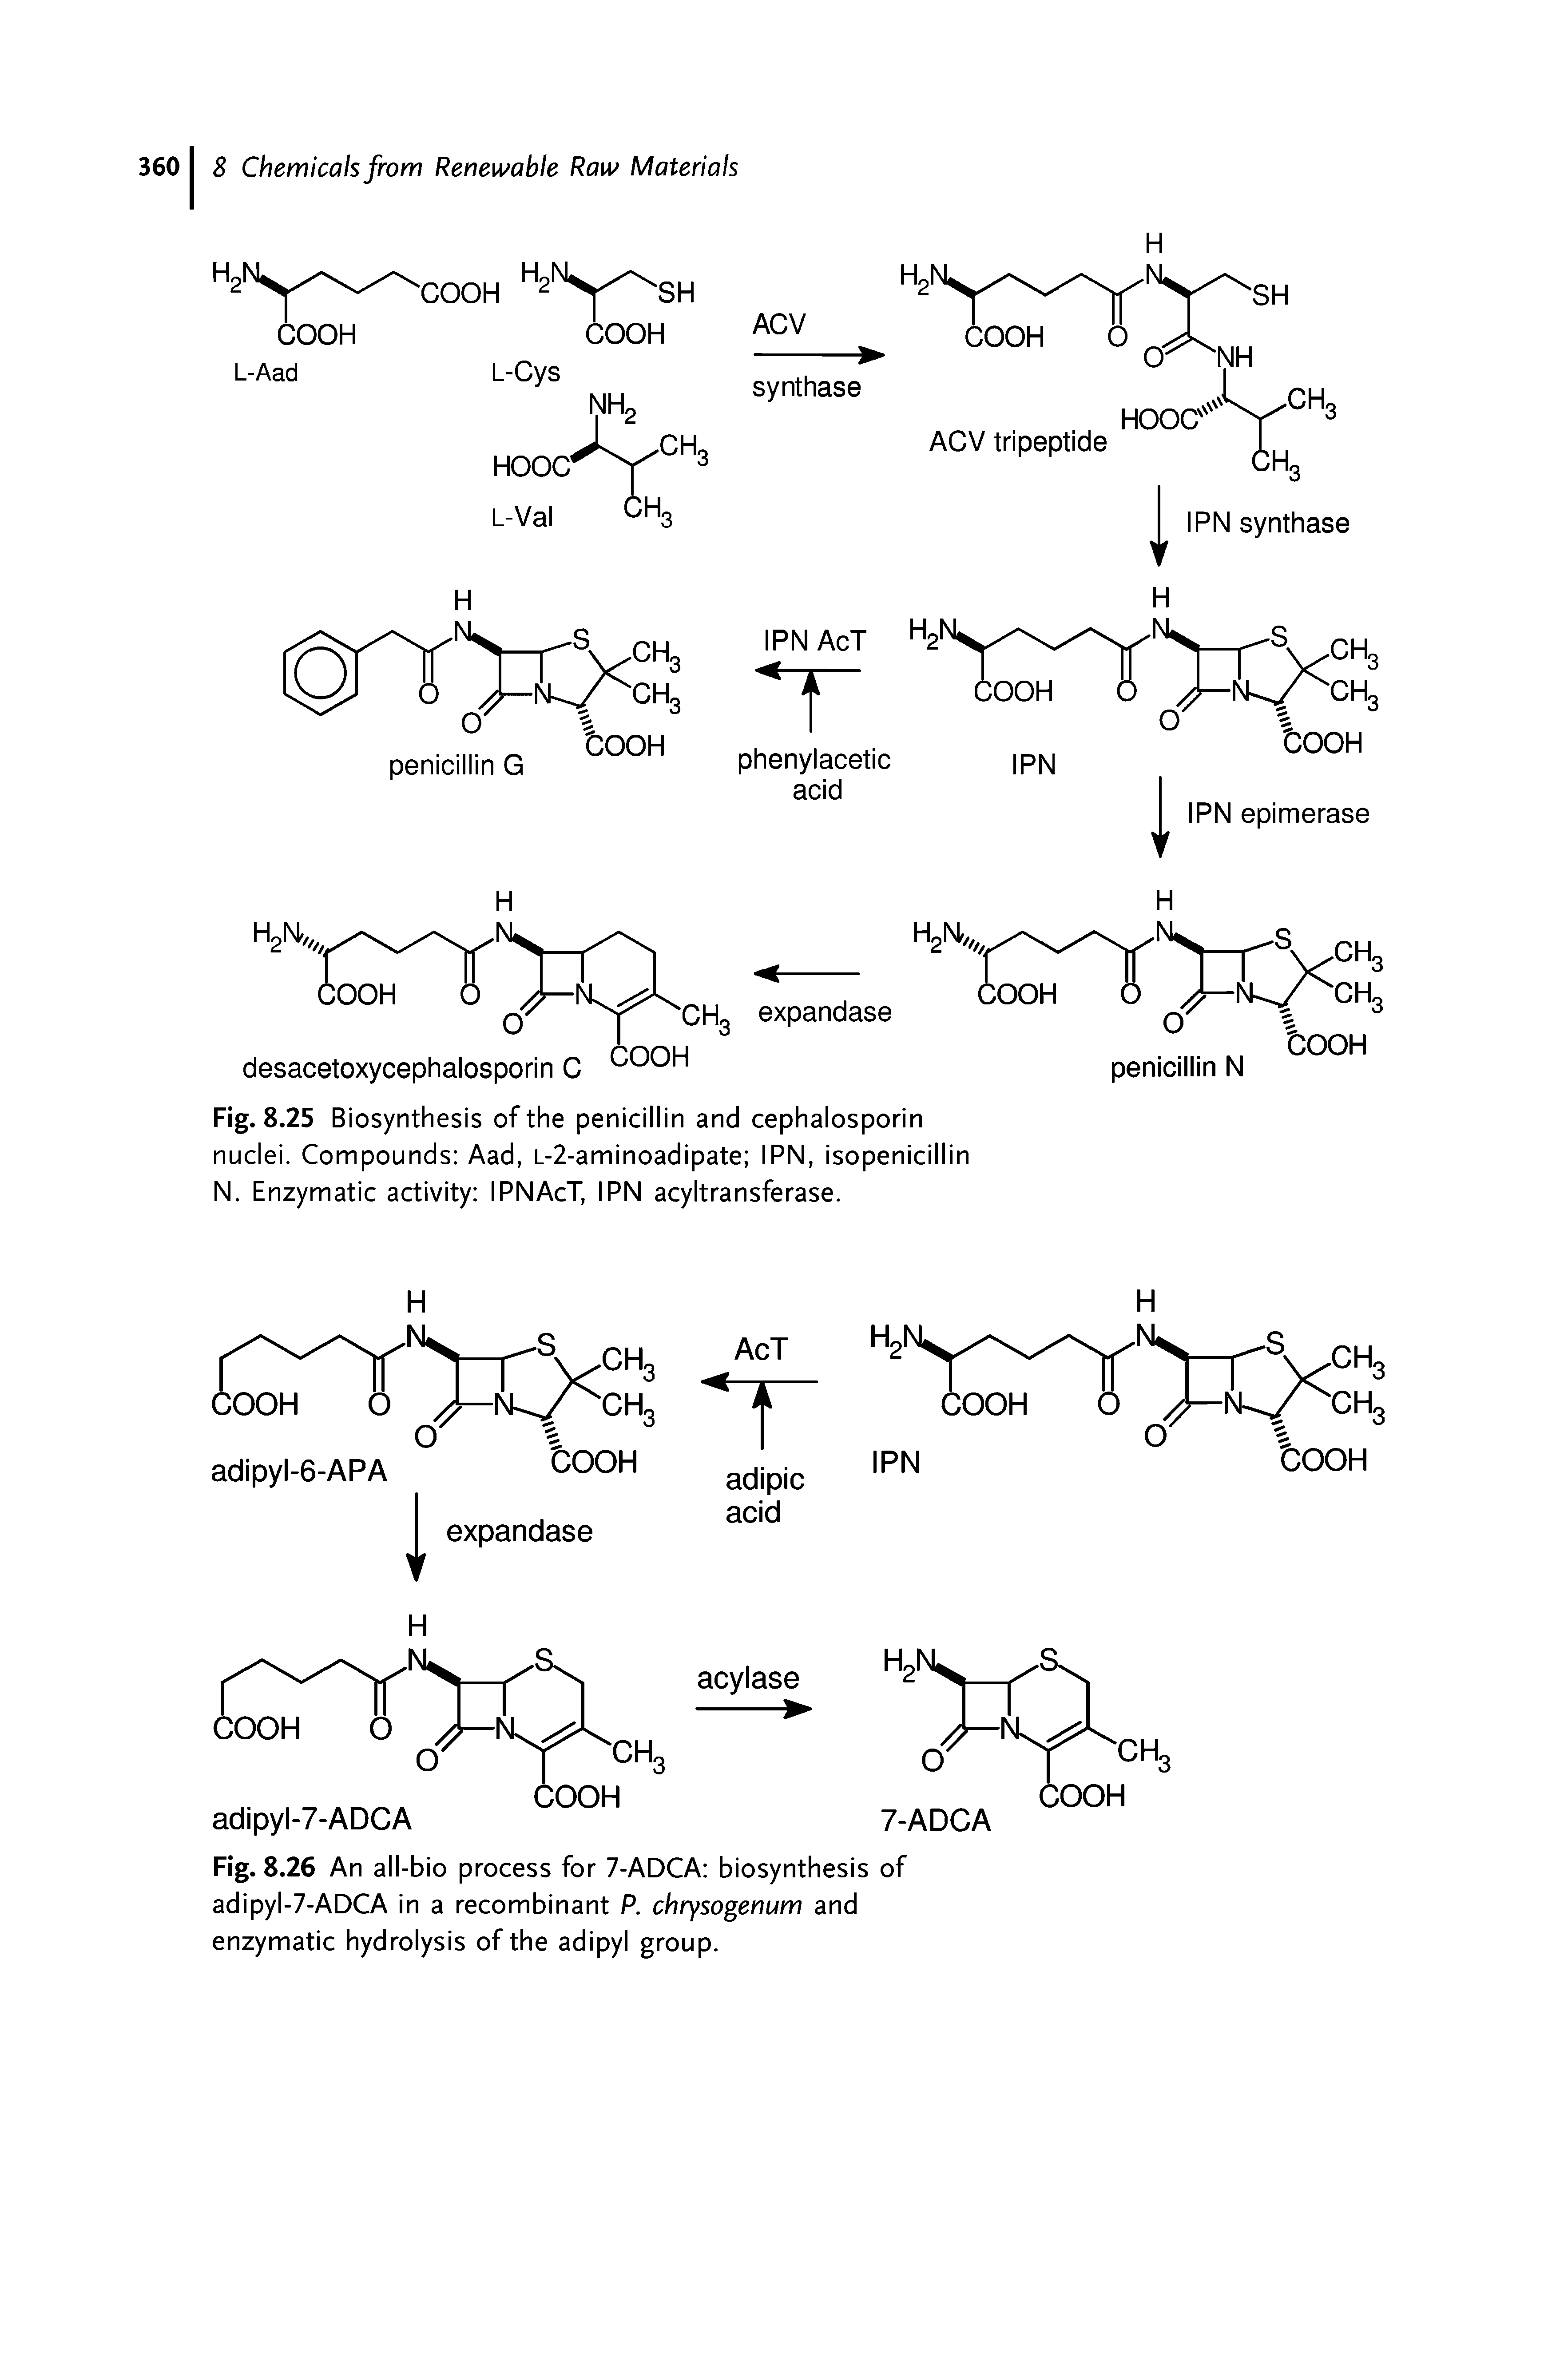 Fig. 8.26 An all-bio process for 7-ADCA biosynthesis of adipyl-7-ADCA in a recombinant P. chrysogenum and enzymatic hydrolysis of the adipyl group.